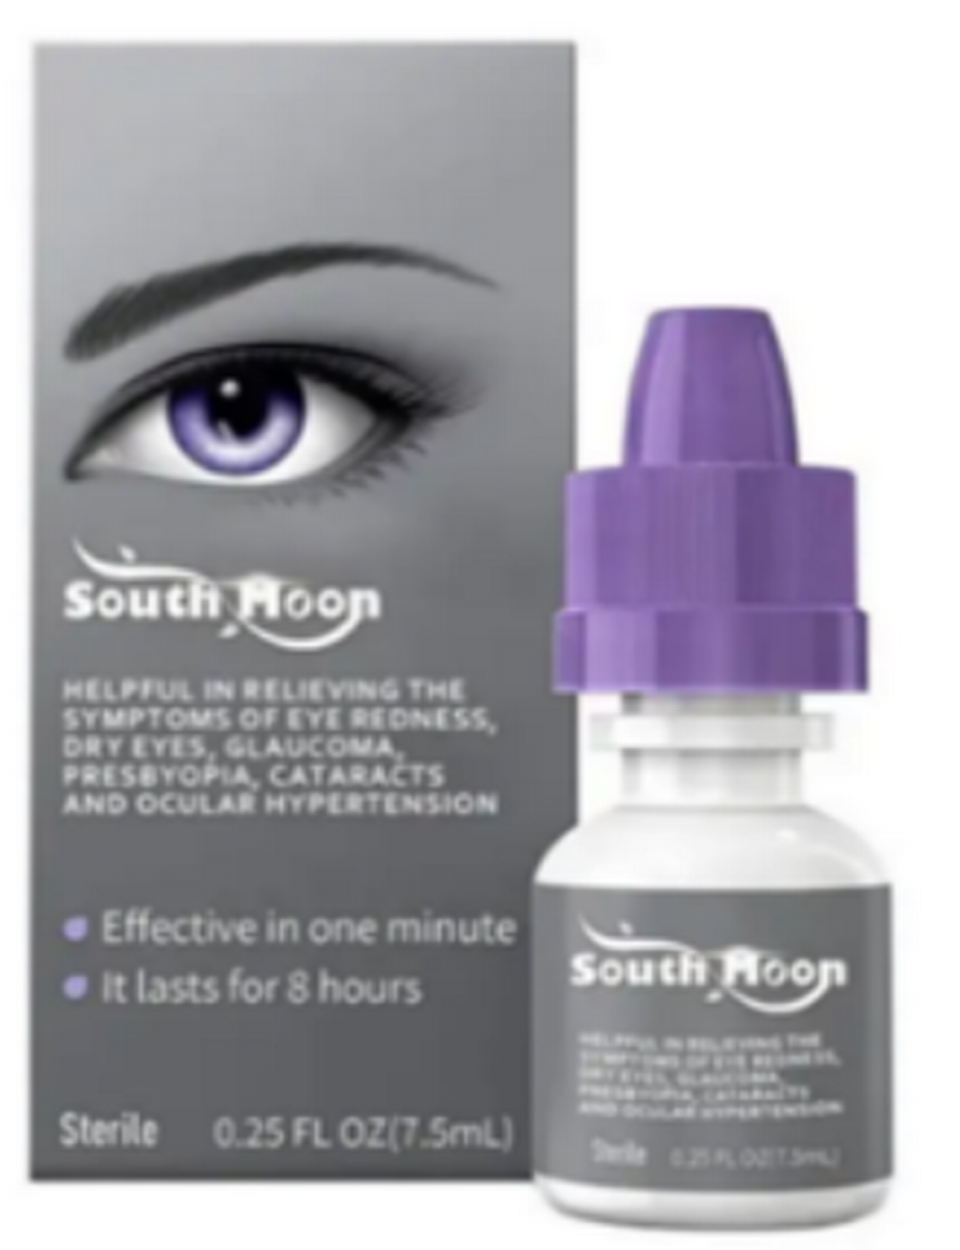 The FDA issued a warning about South Moon eye drops FDA